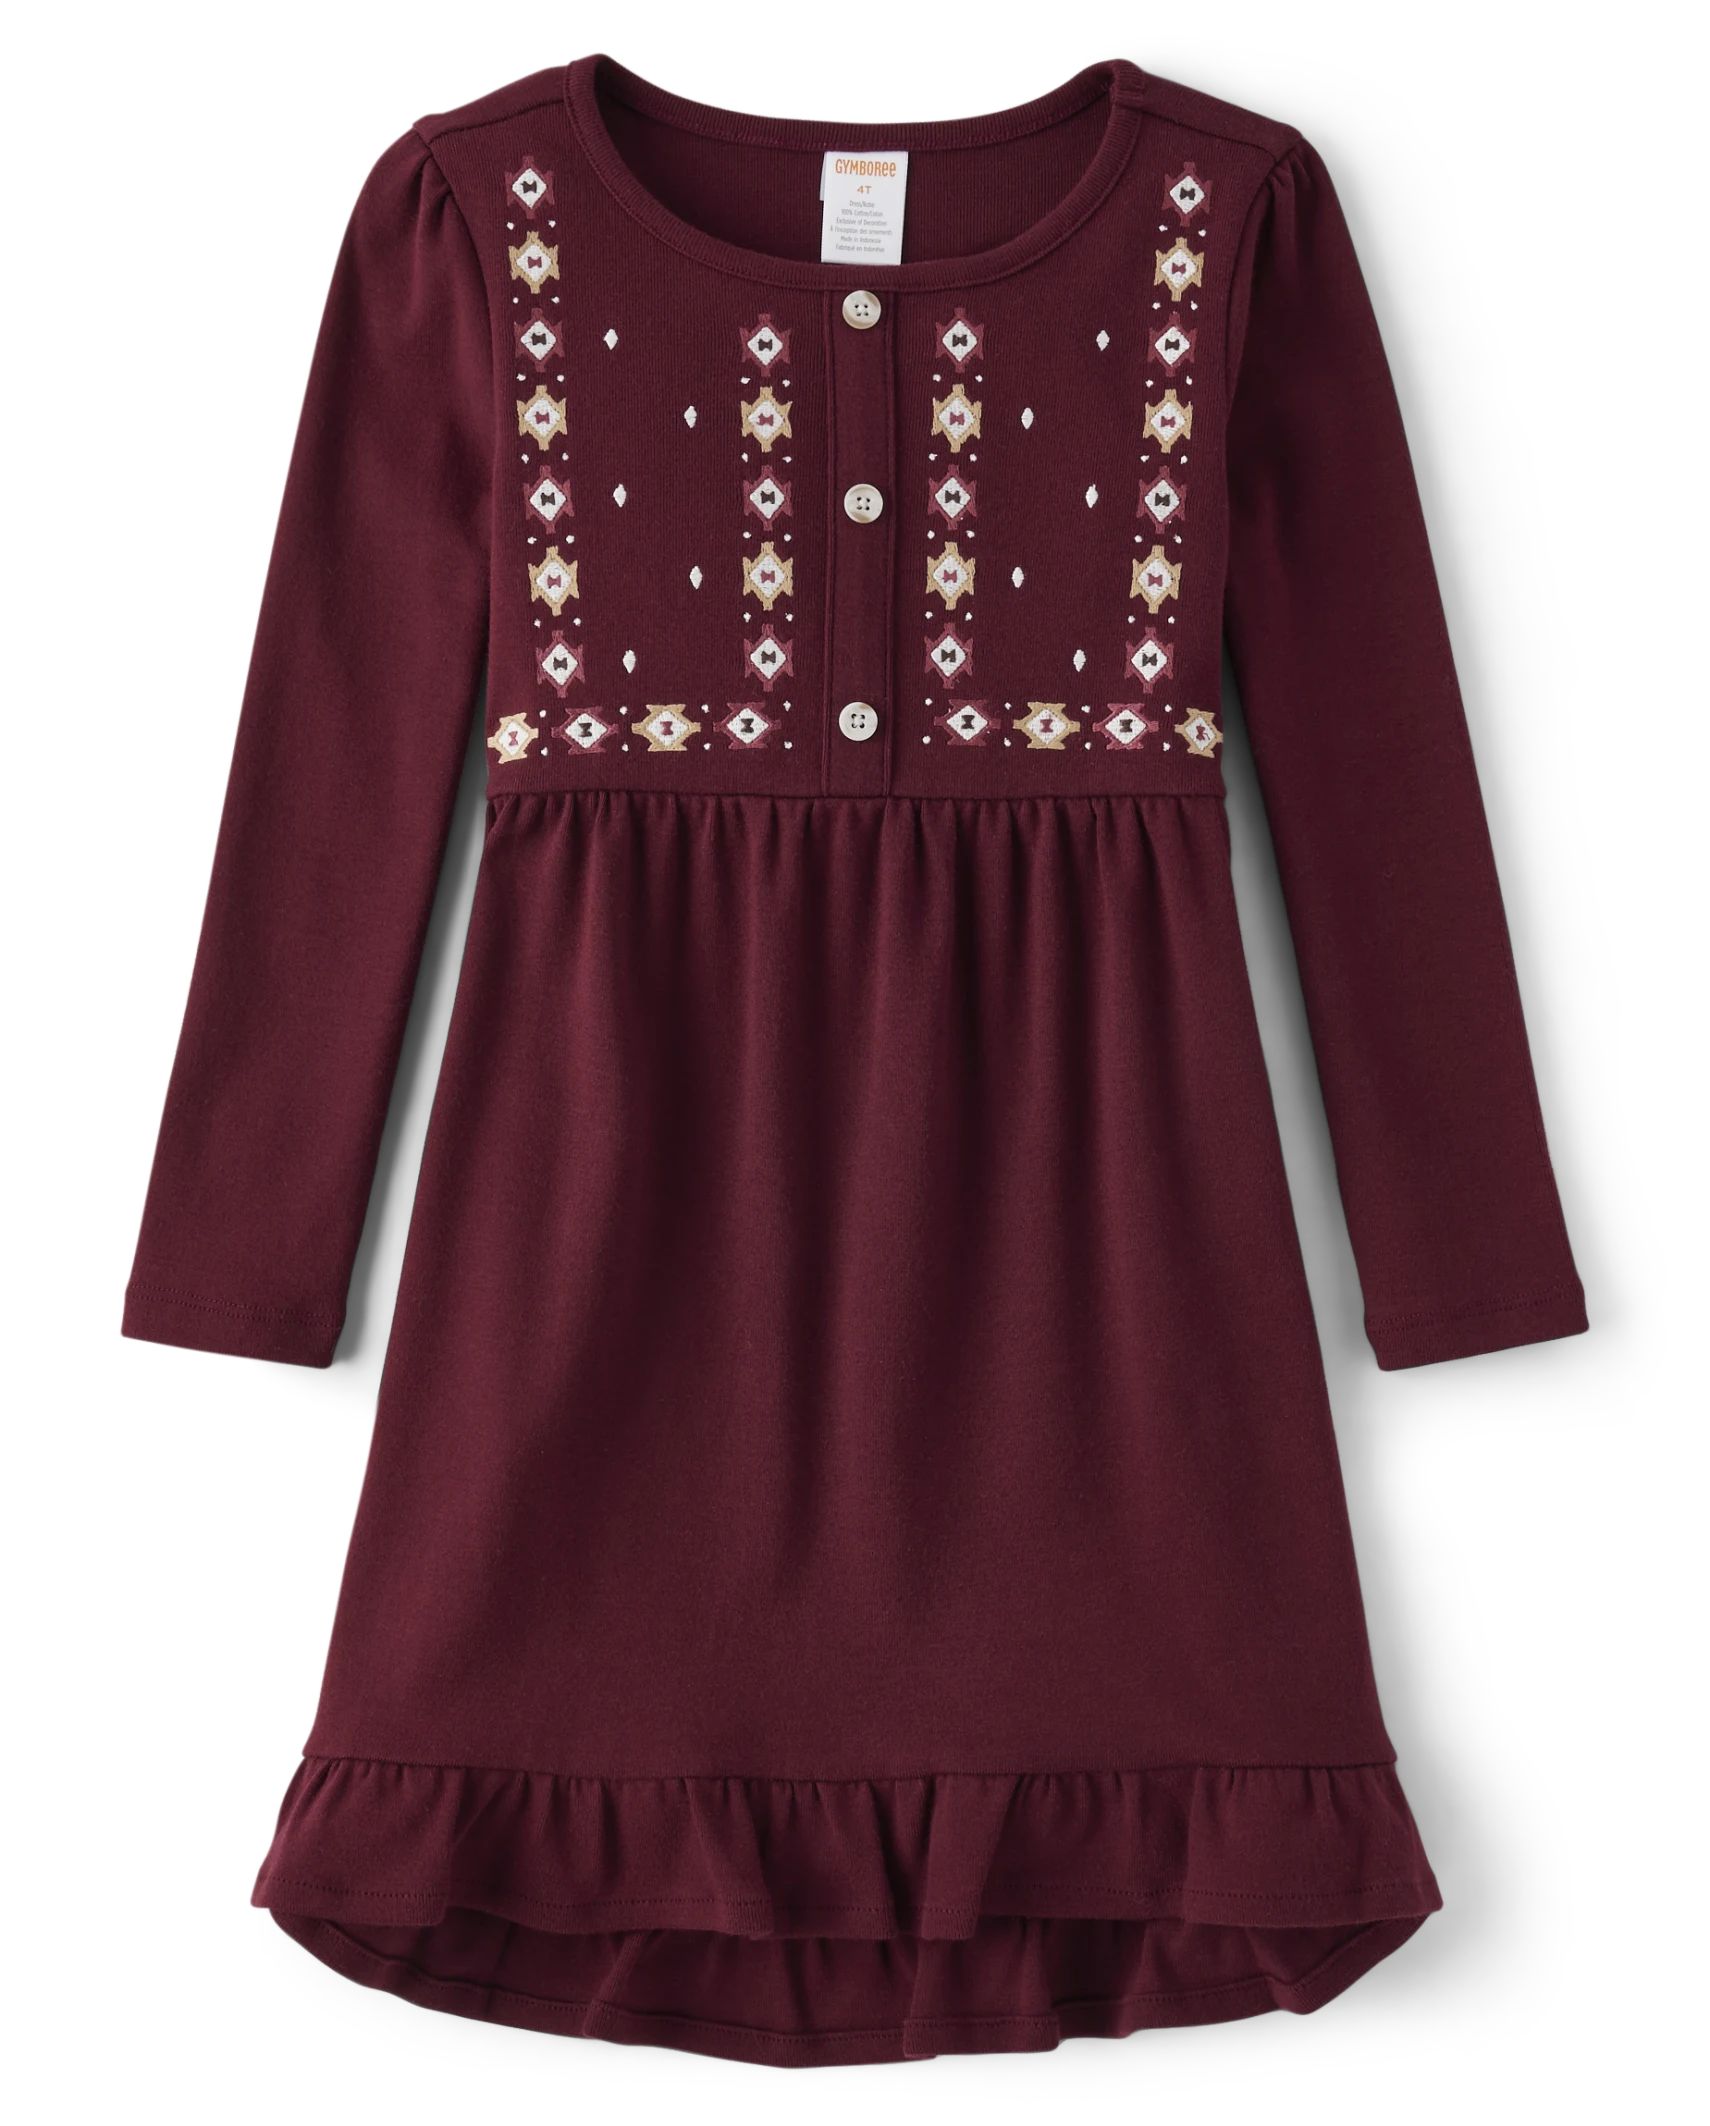 Girls Long Sleeve Embroidered Pattern Knit Shirt Dress - Rustic Ranch | The Children's Place | The Children's Place